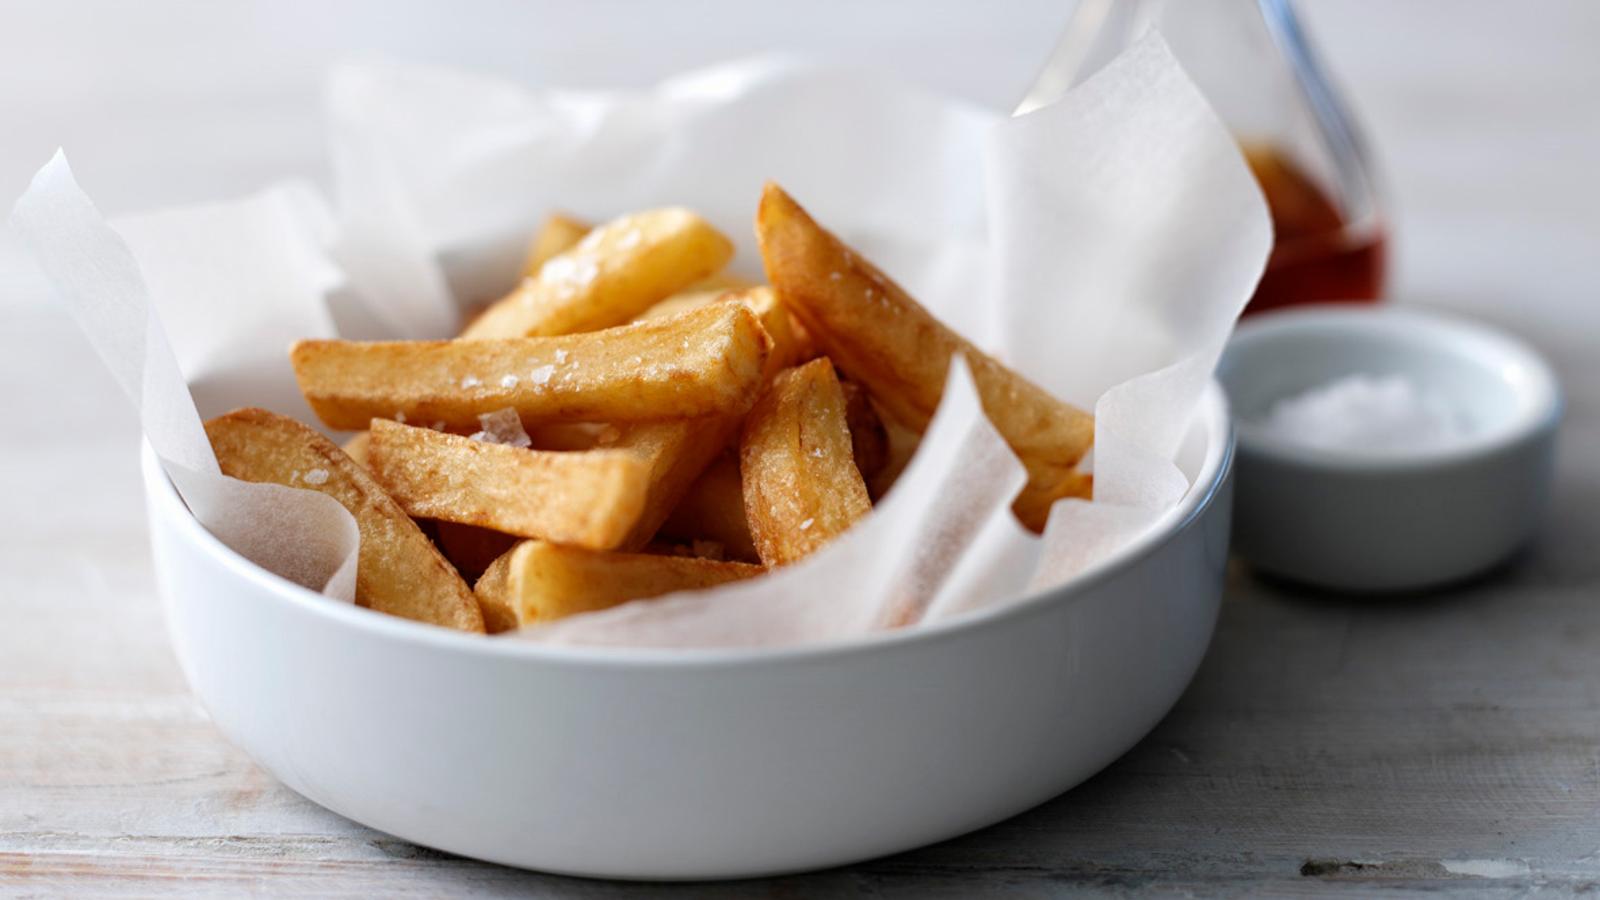 How to cut and fry potato chips perfectly